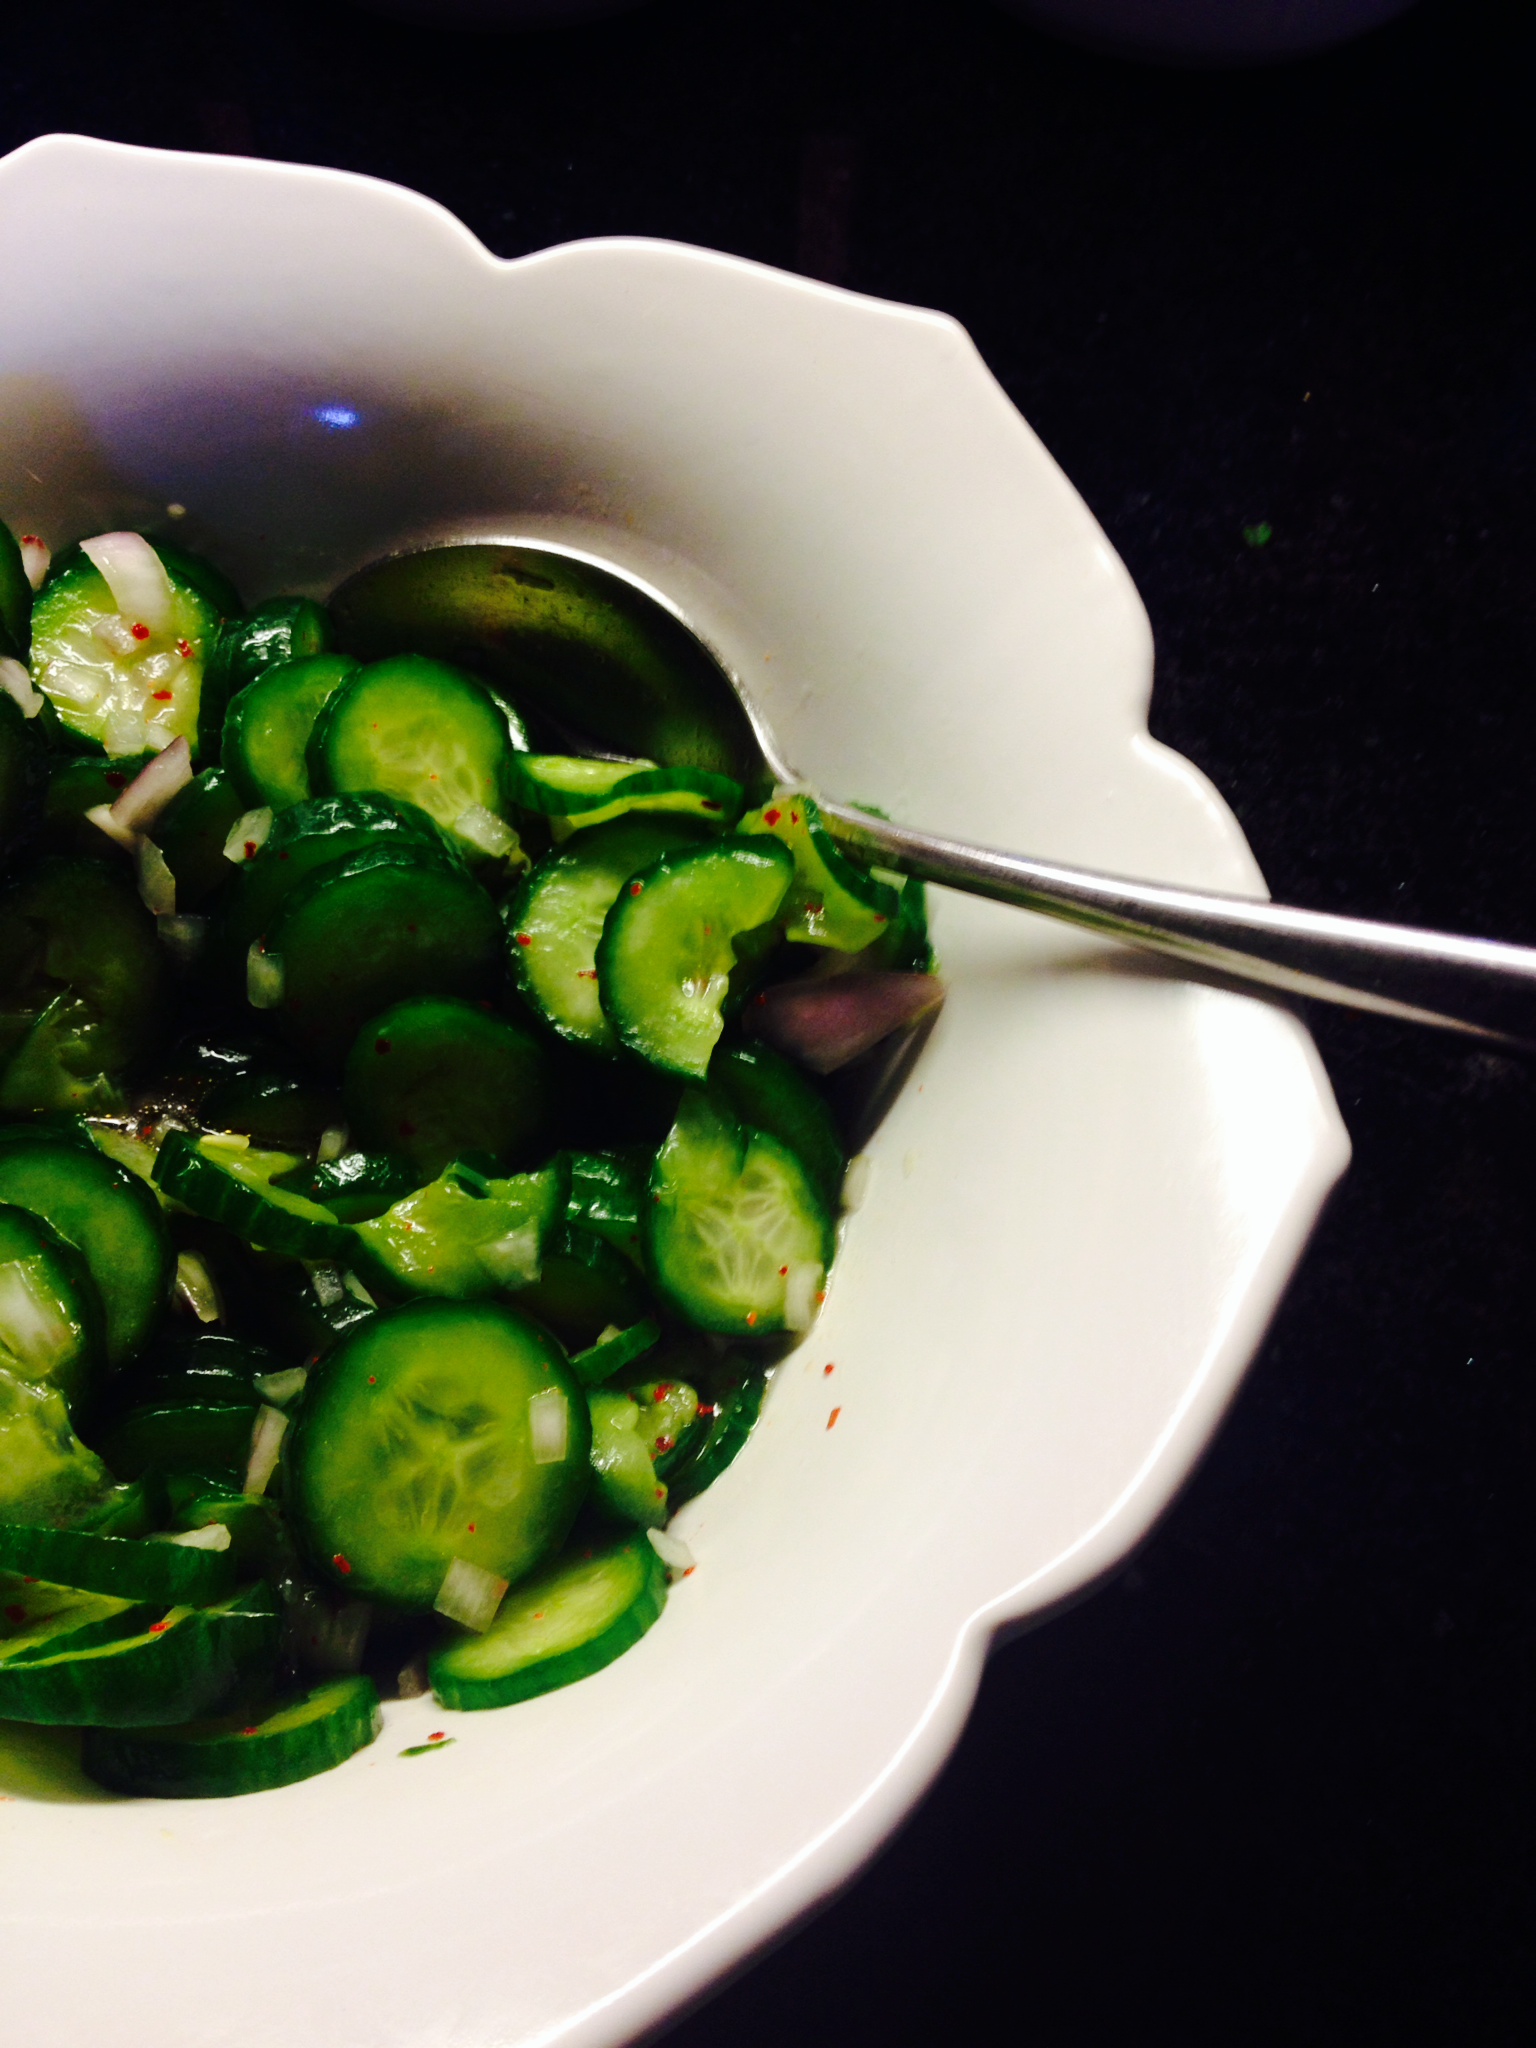 quick-pickled asian cucumber salad :: by radish*rose